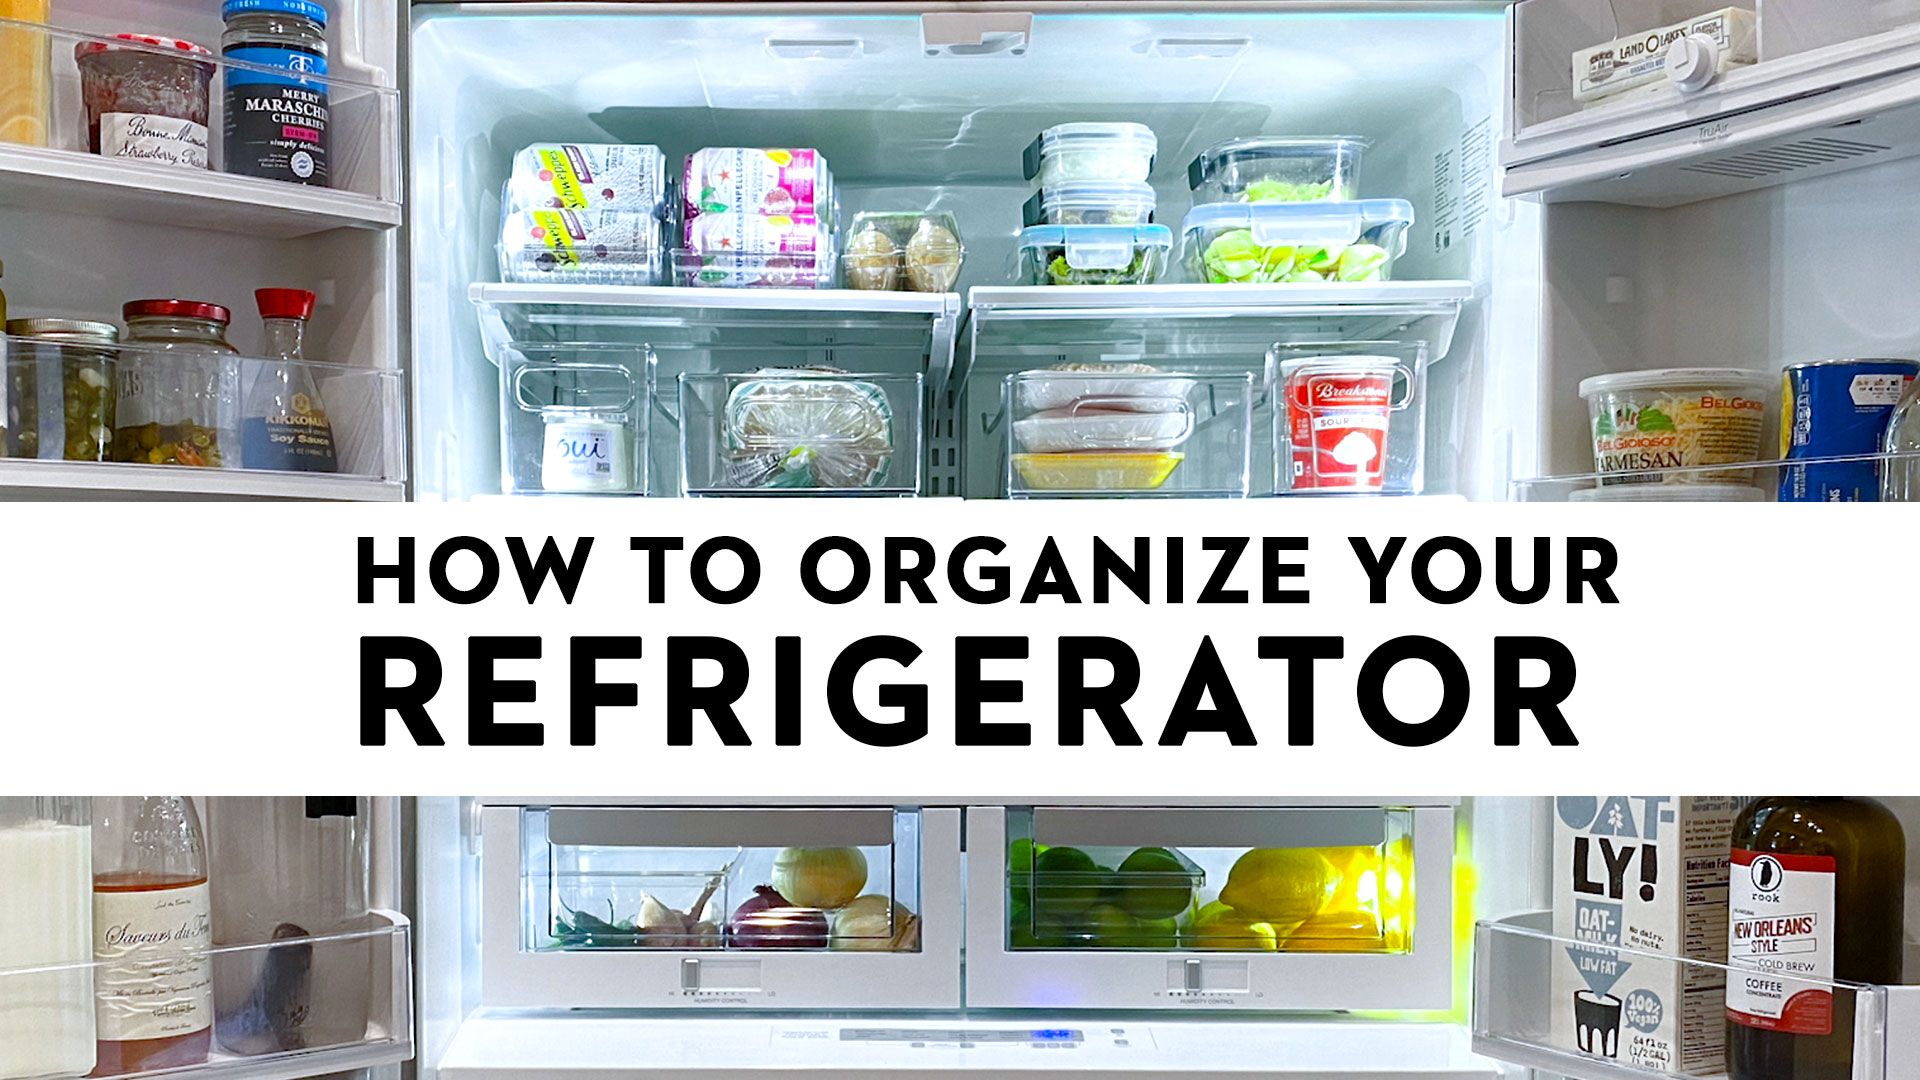 Guide to Fridge Organization, Ideas and Tips - Alphafoodie